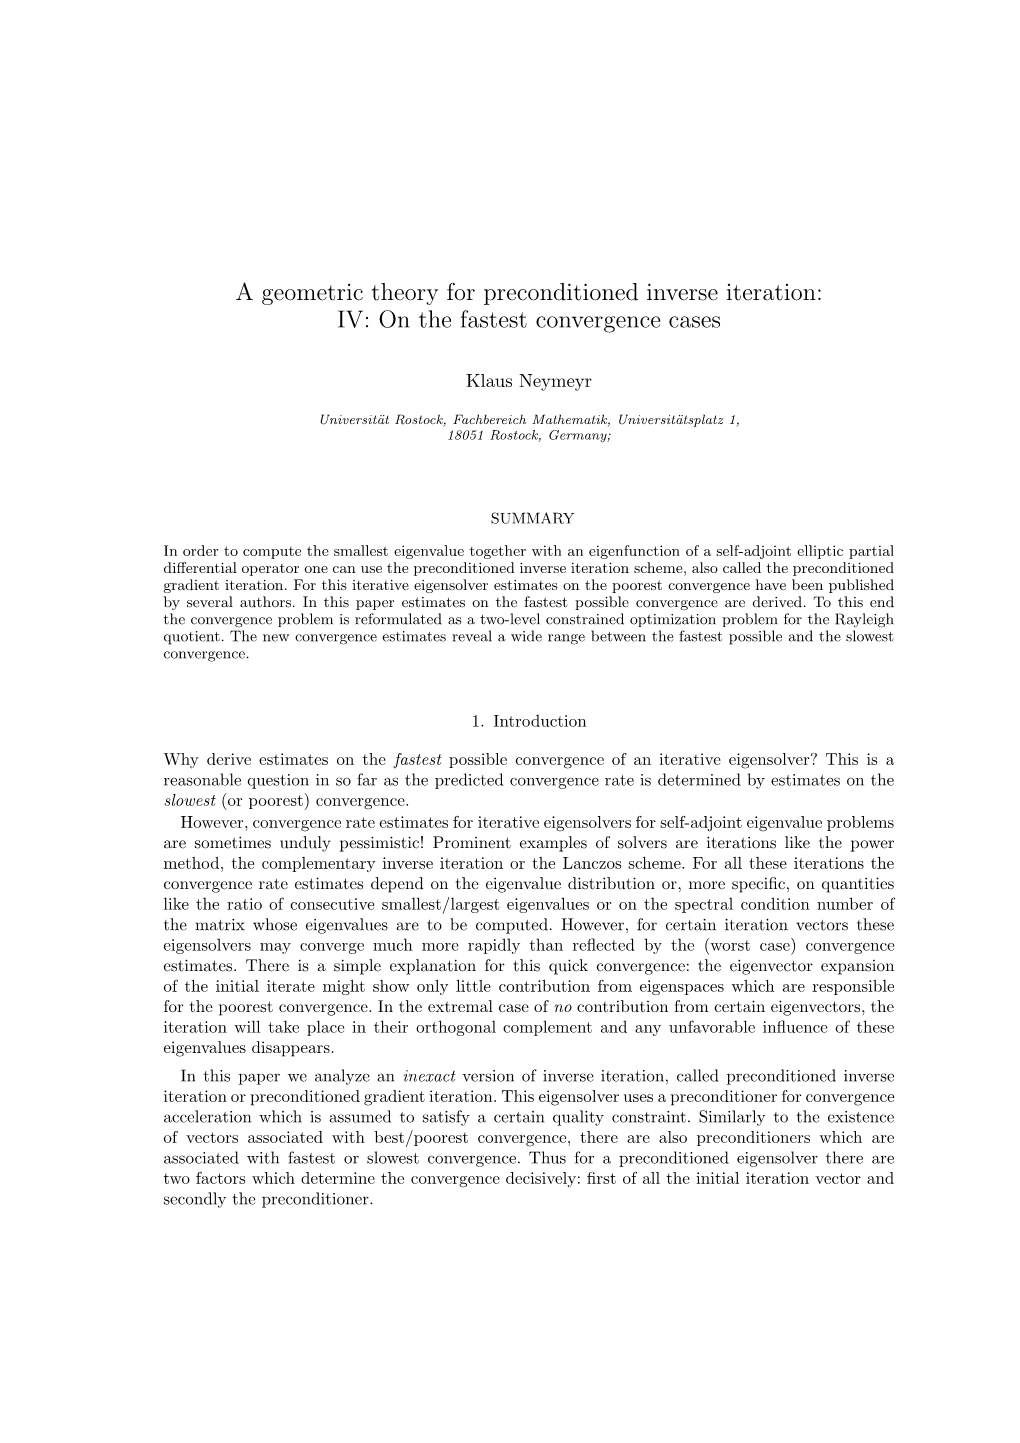 A Geometric Theory for Preconditioned Inverse Iteration: IV: on the Fastest Convergence Cases